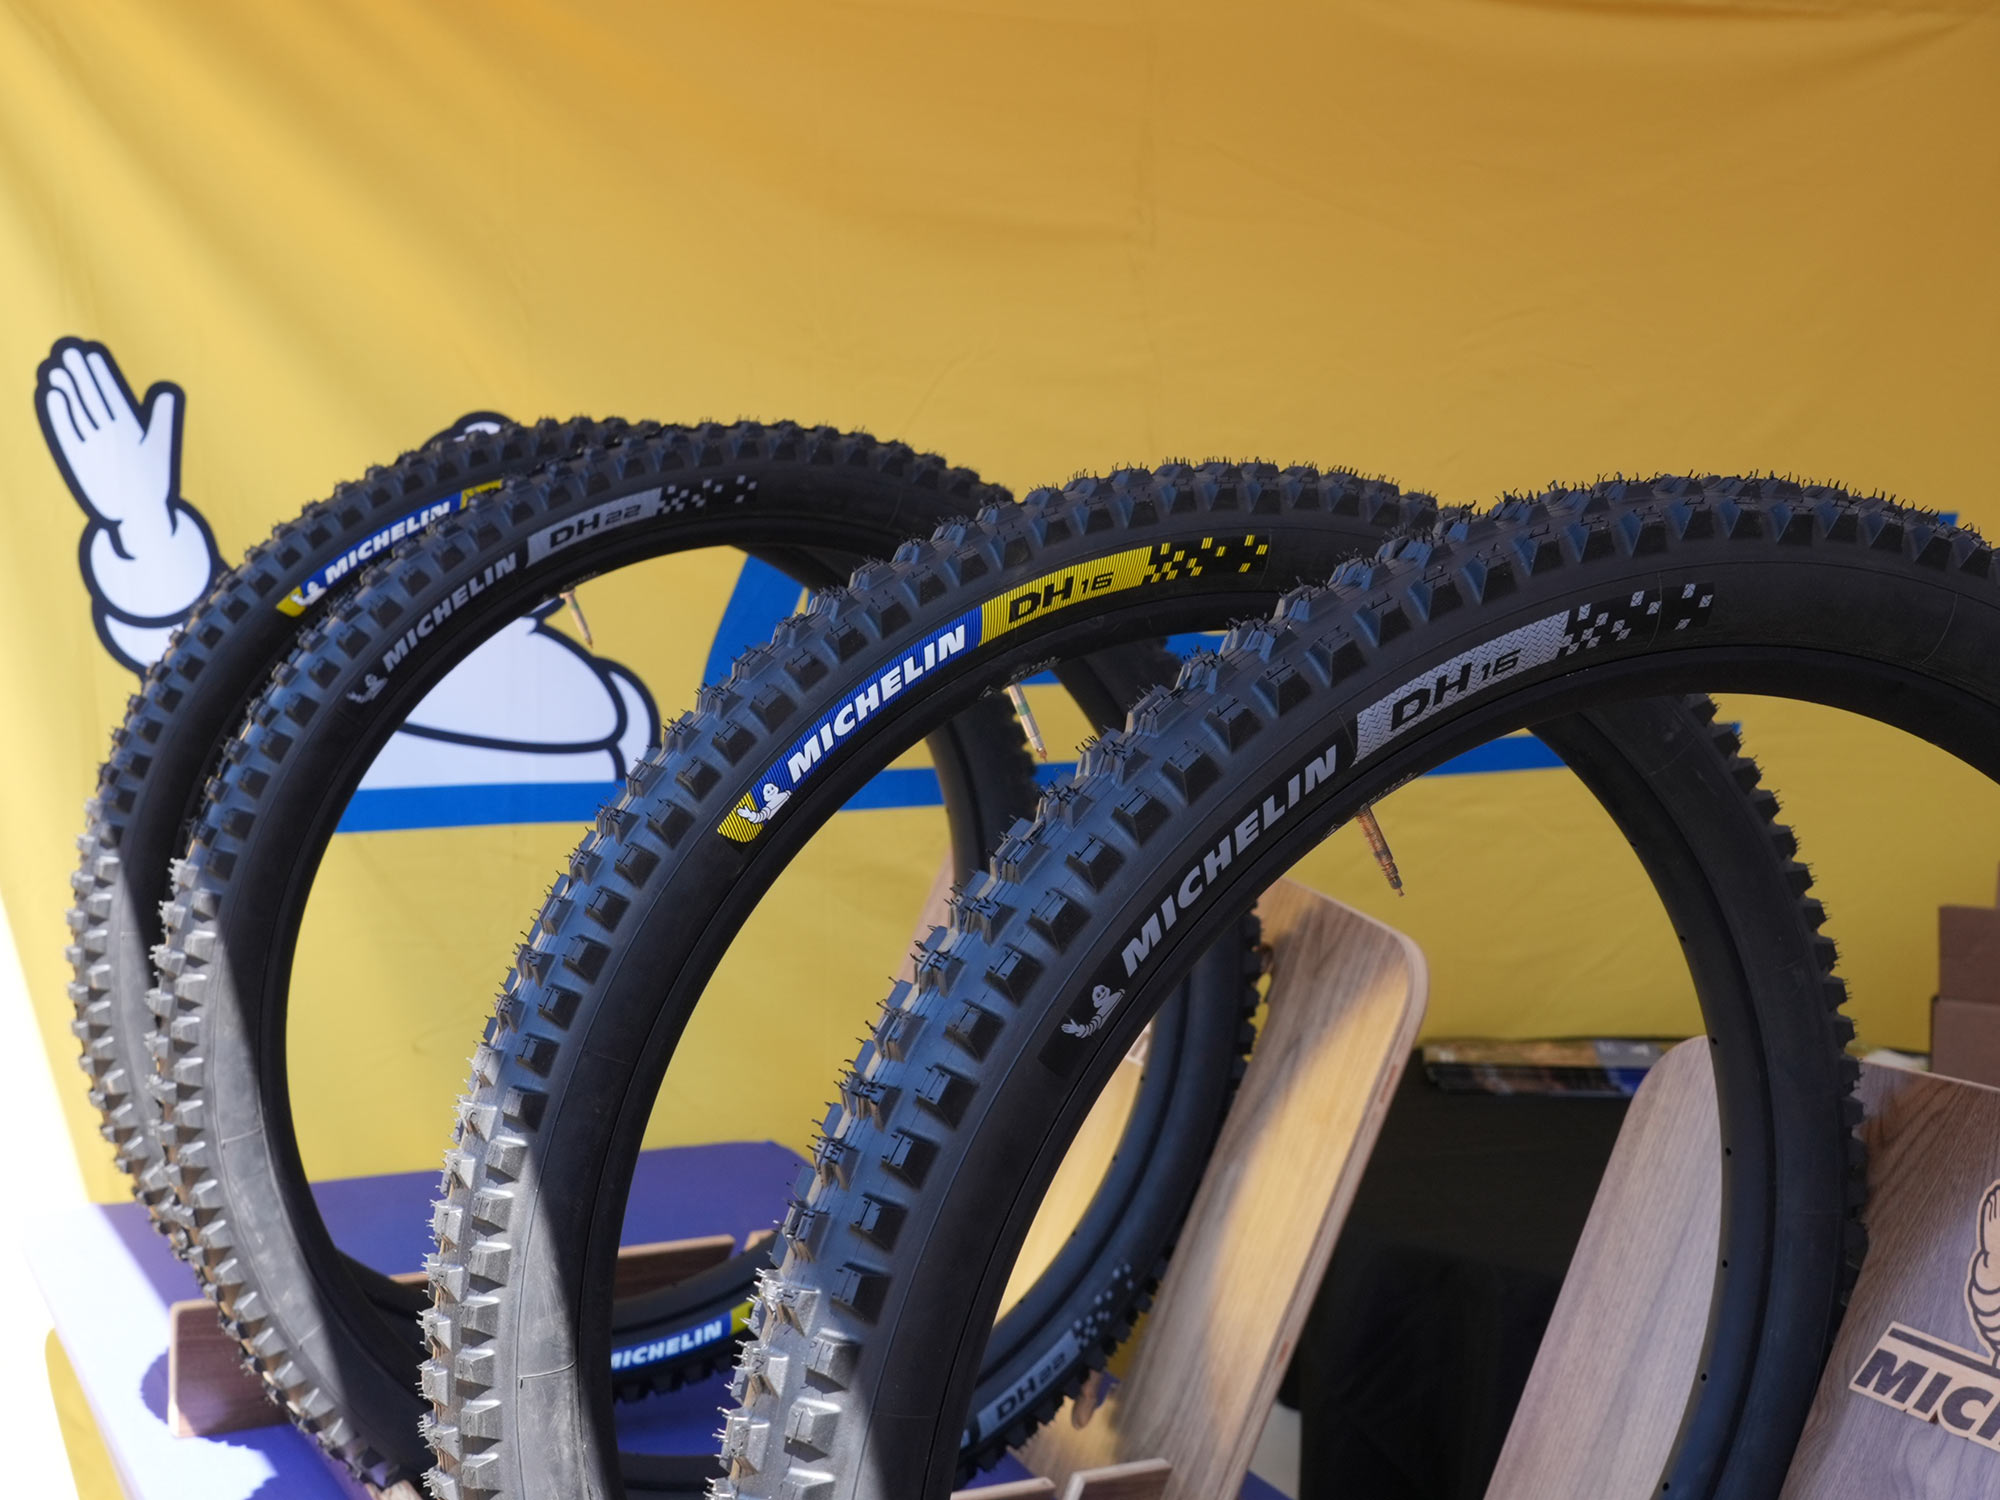 2024 michelin DH16 and DH22 downhill mountain bike tires